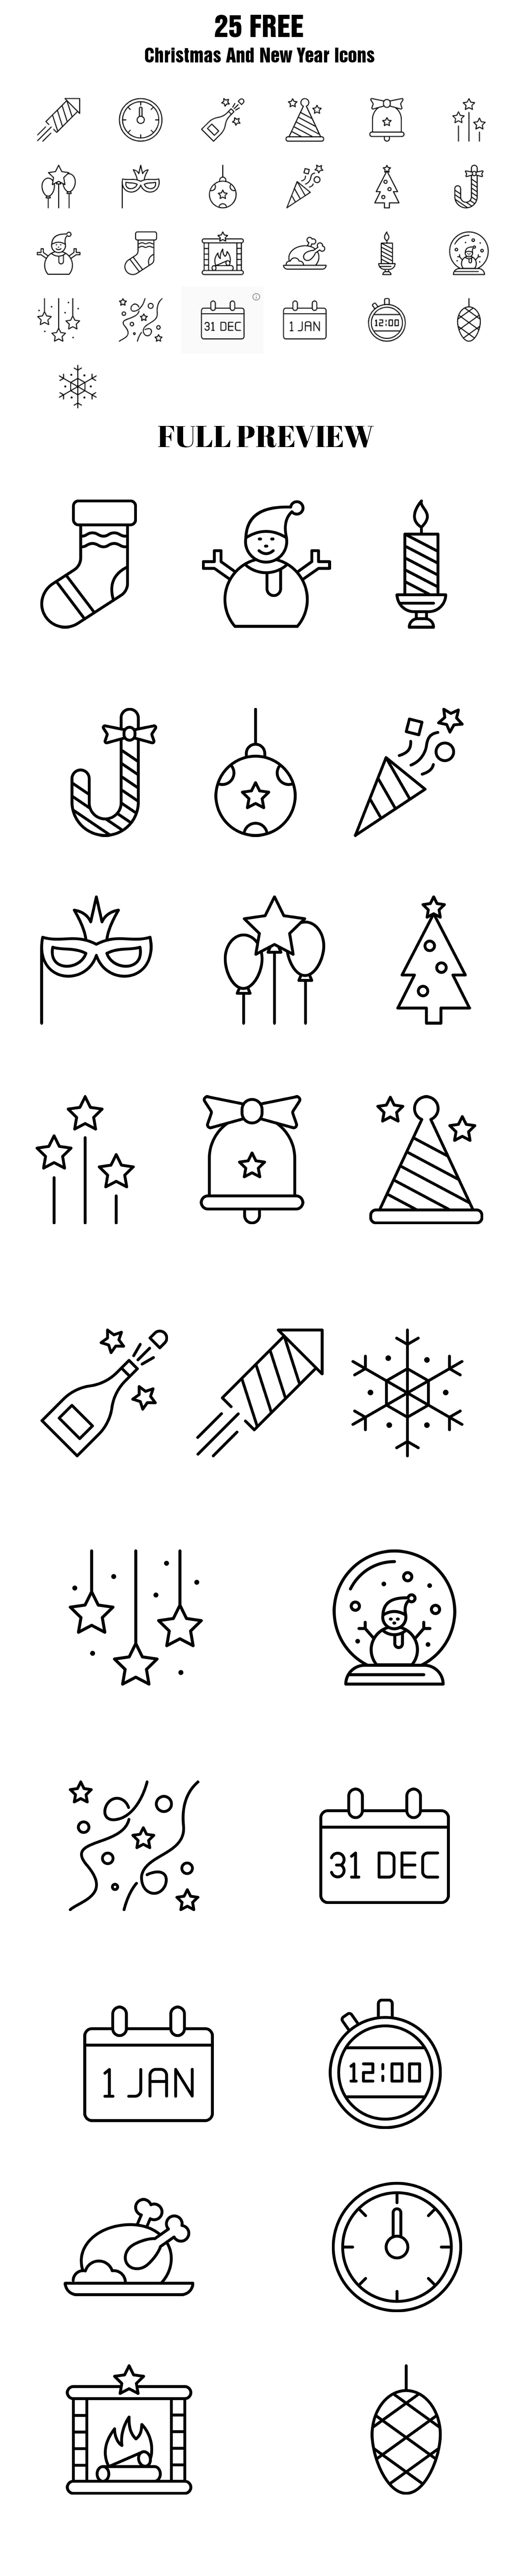 It is a unique, excellent and good-quality icons made for your forthcoming holiday projects.